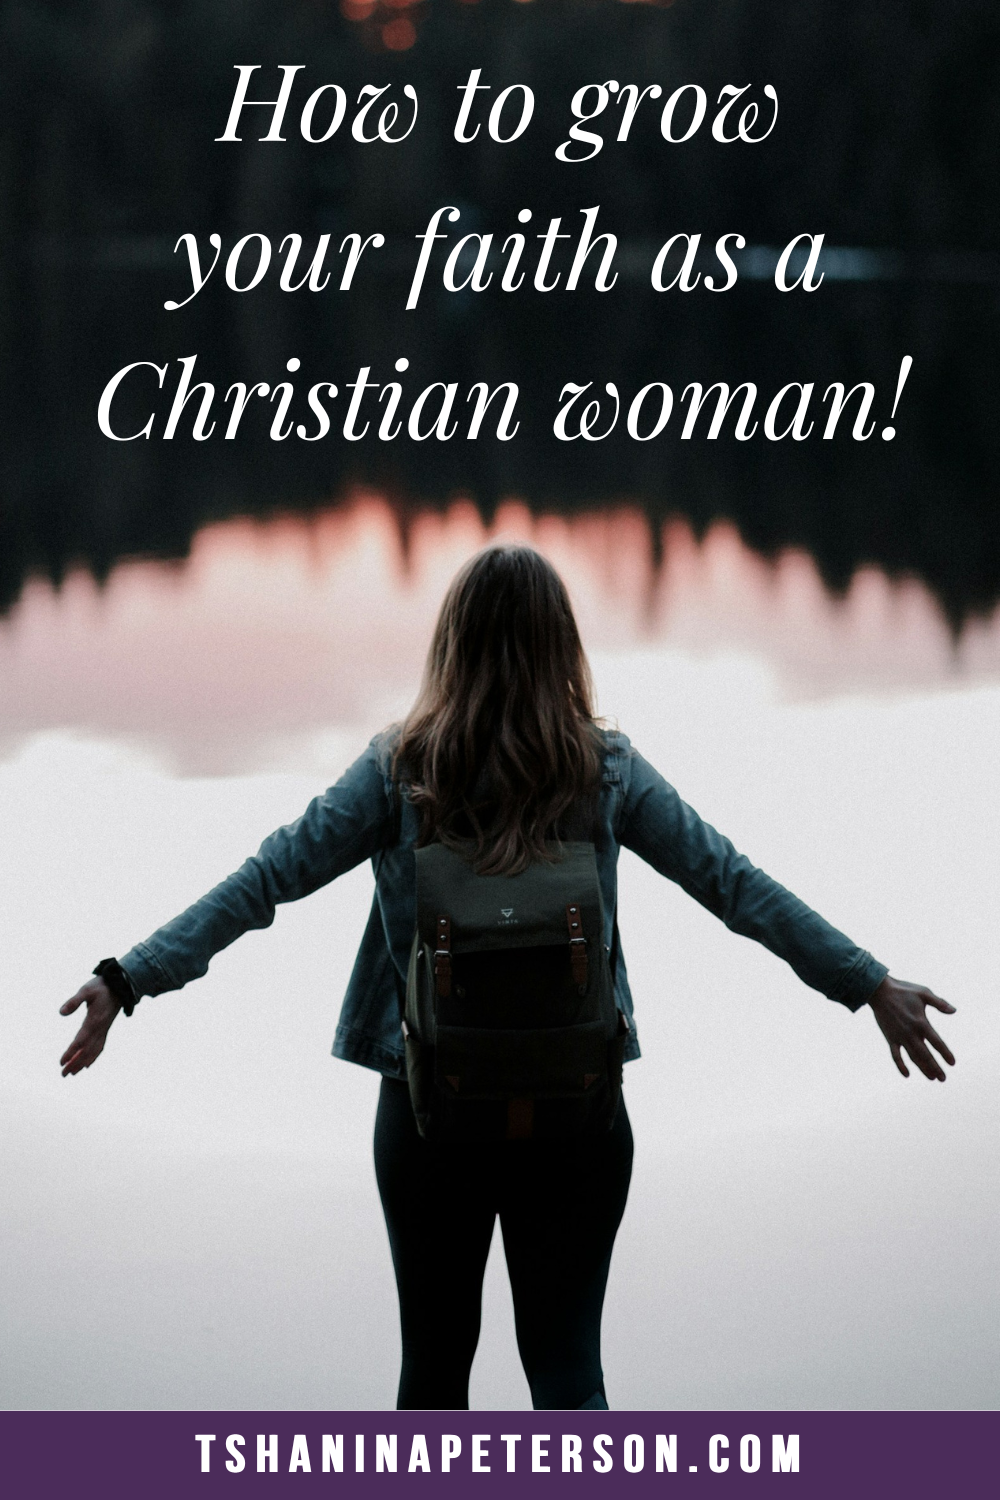 woman with outstretched arms overlooking water and mountains near dusk - you'll never regret learning how to grow your faith as a christian woman